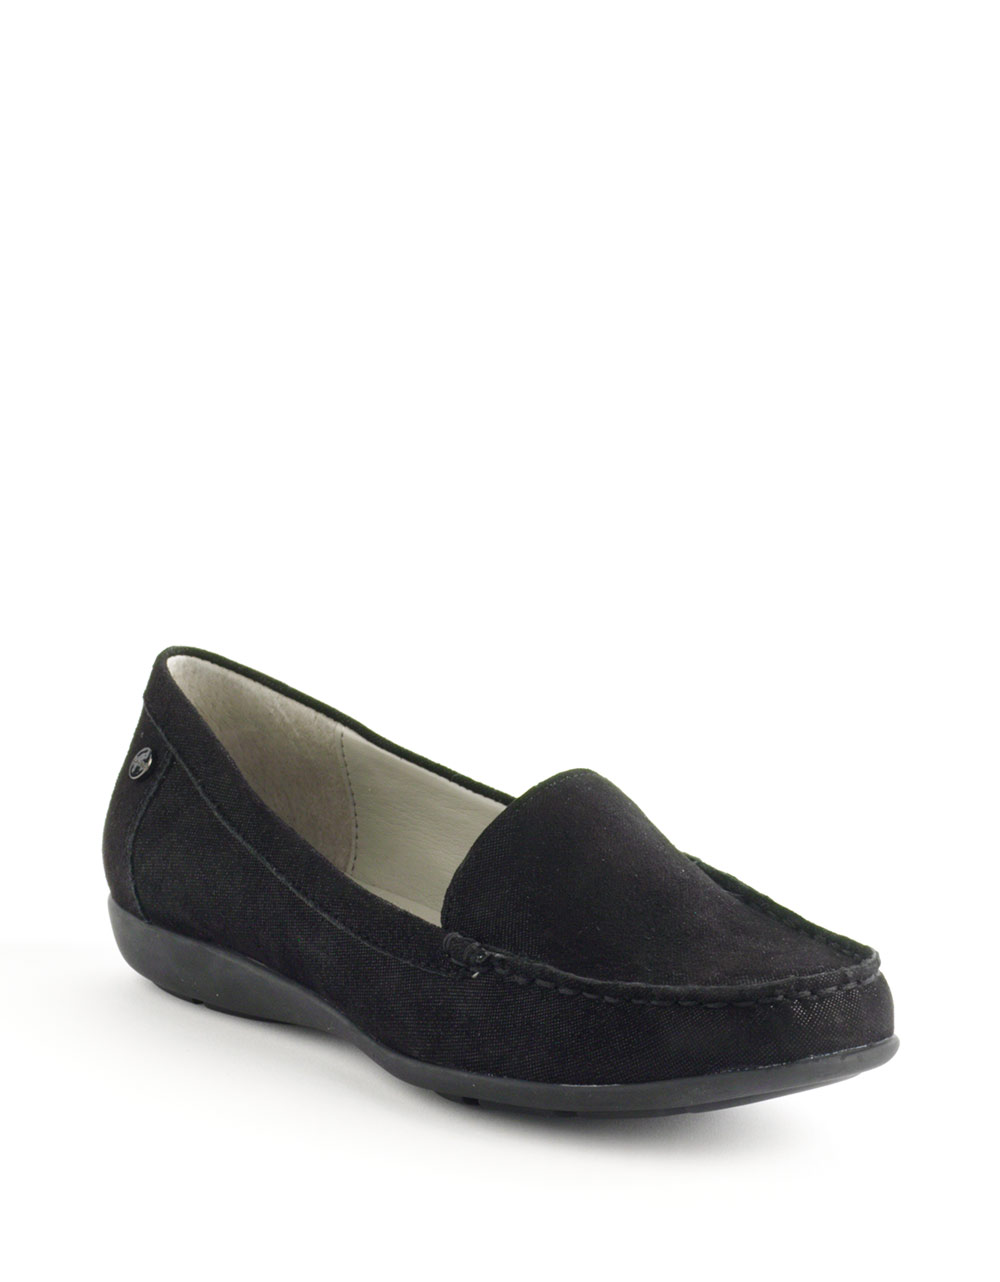 Lyst - Calvin Klein Shimmer Suede Flat Loafers in Black